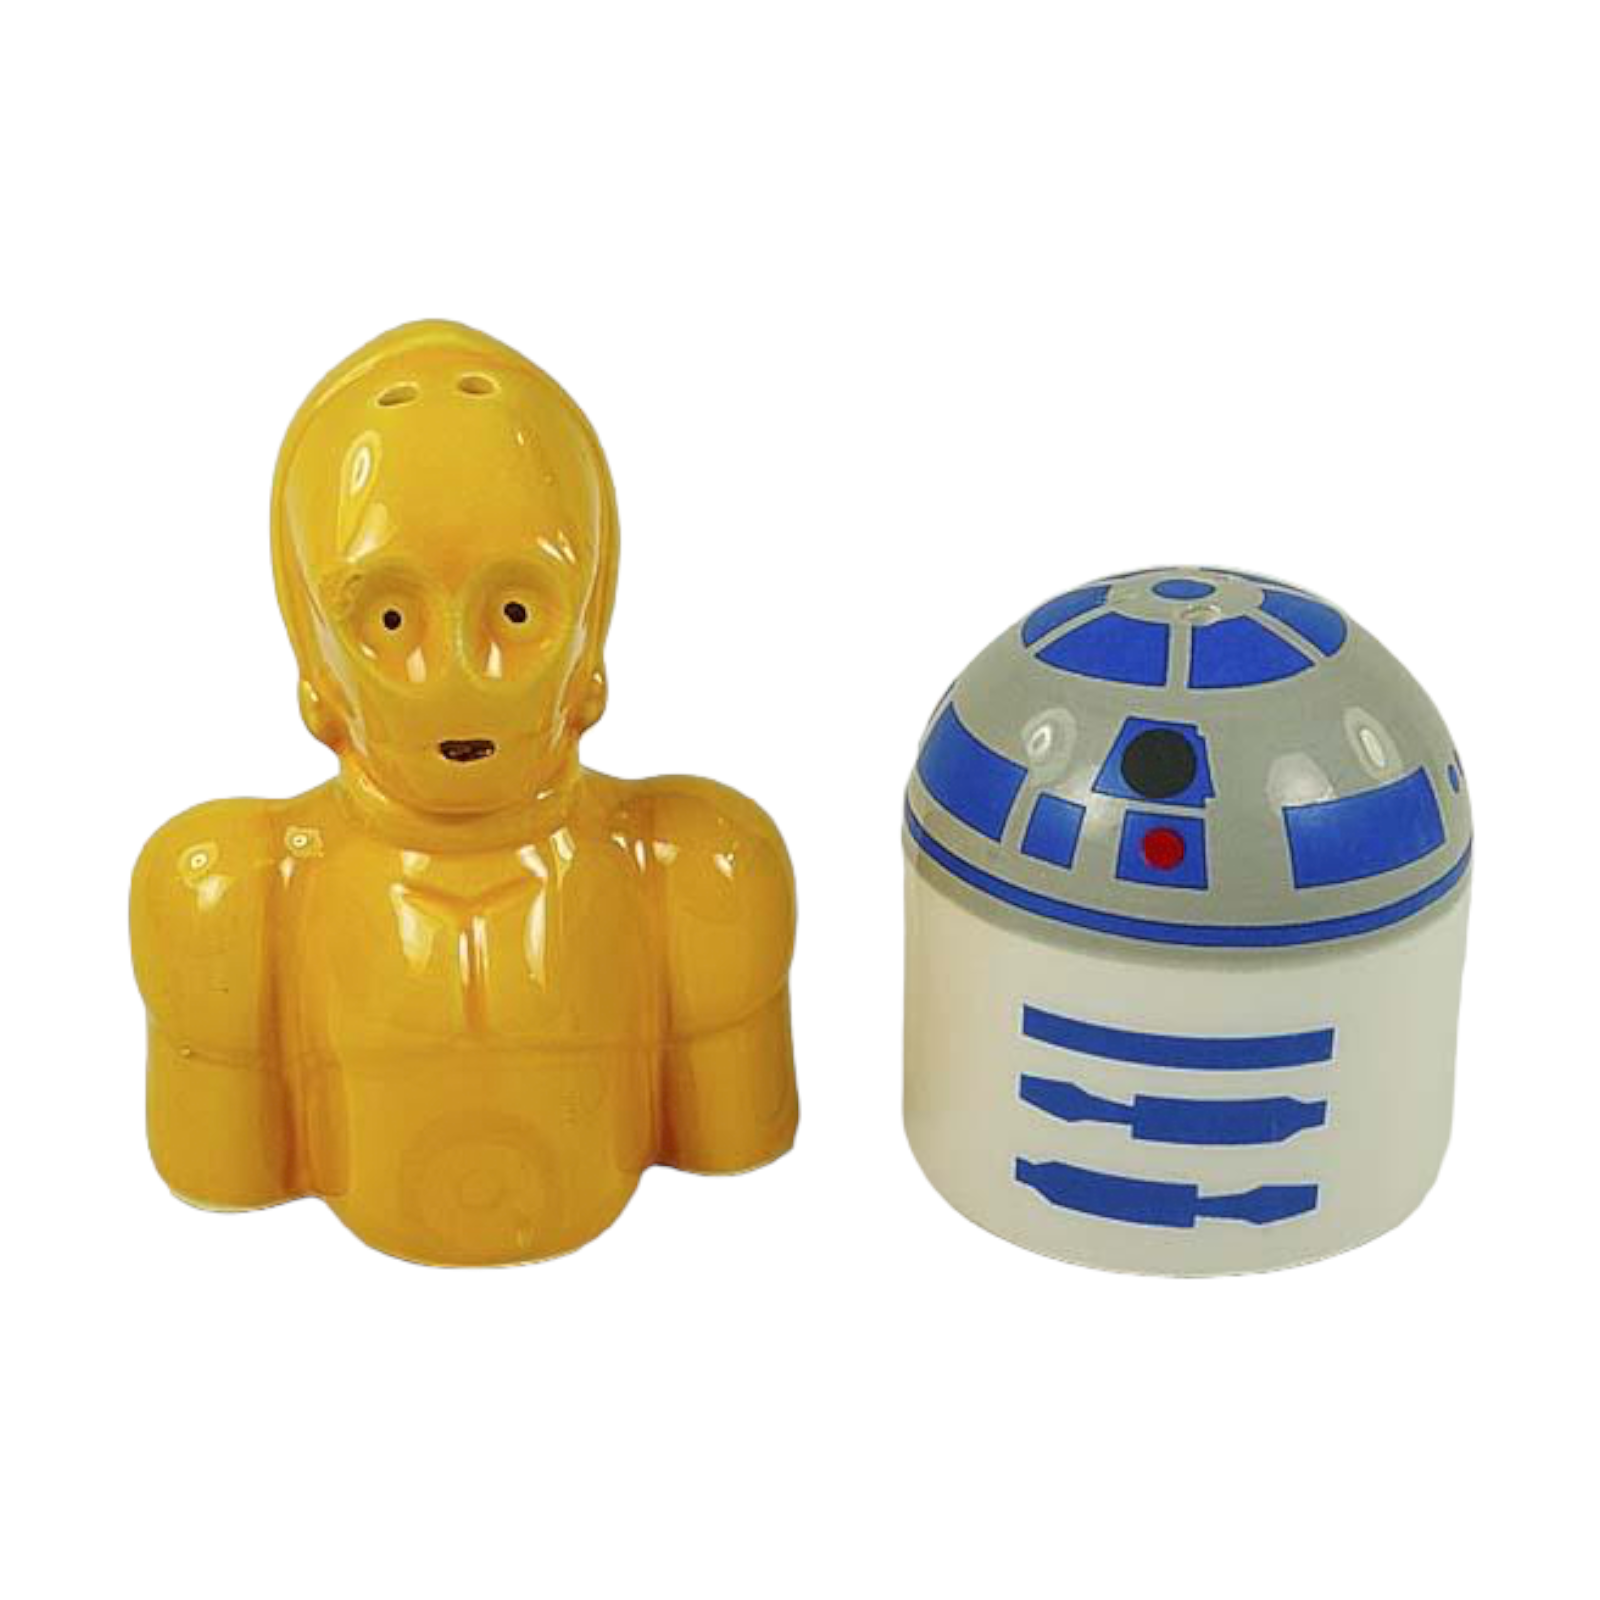 C3PO and R2D2 Star Wars Salt and Pepper Shakers